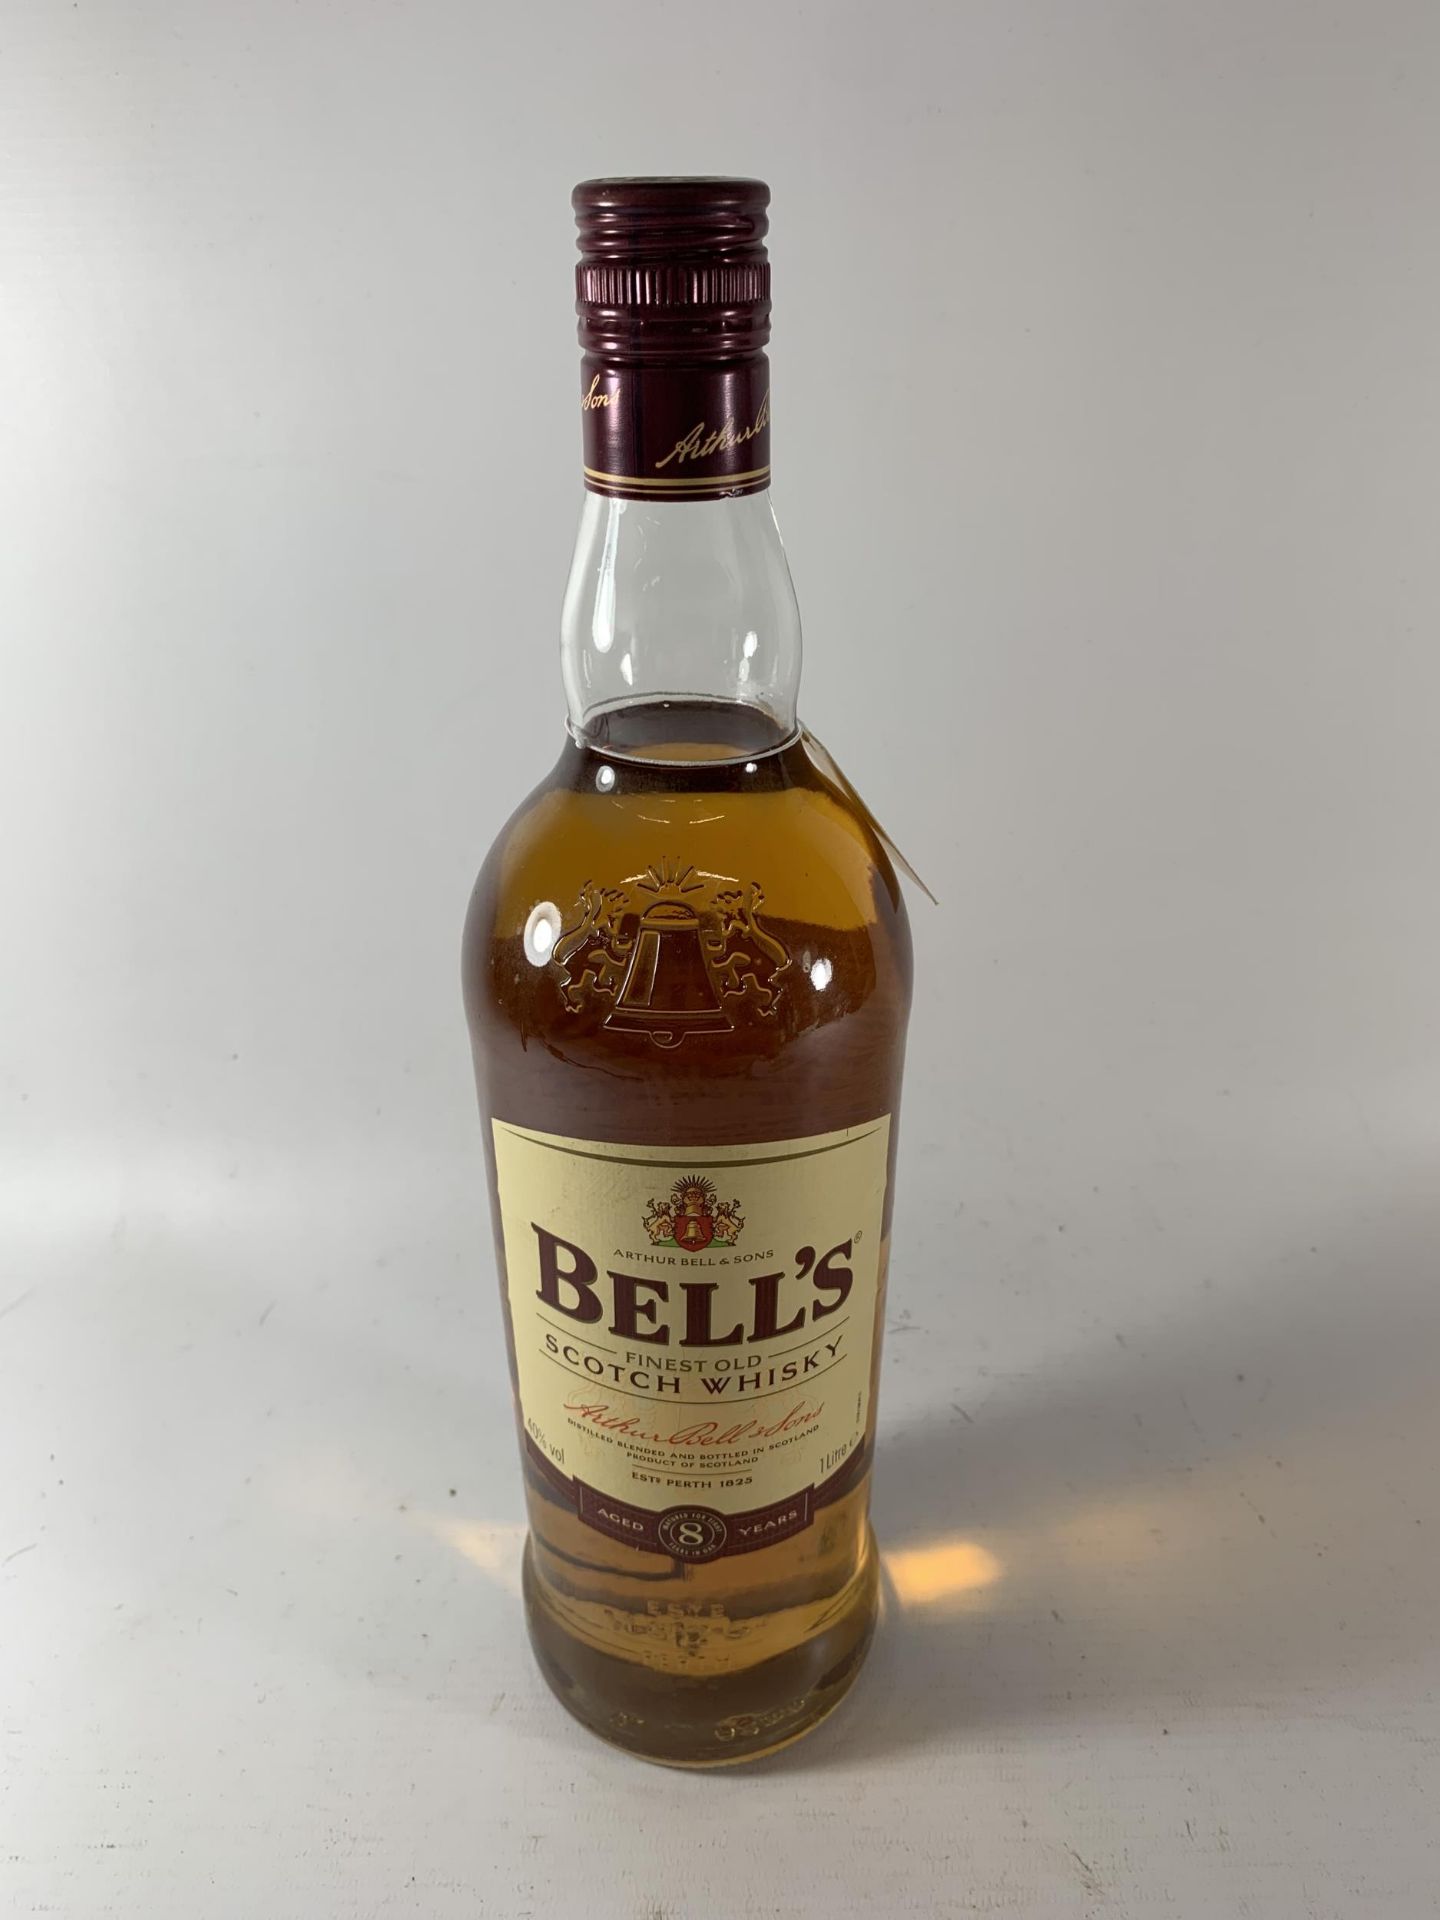 1 X 1L BOTTLE - BELL'S FINEST OLD AGED 8 YEARS OLD SCOTCH WHISKY